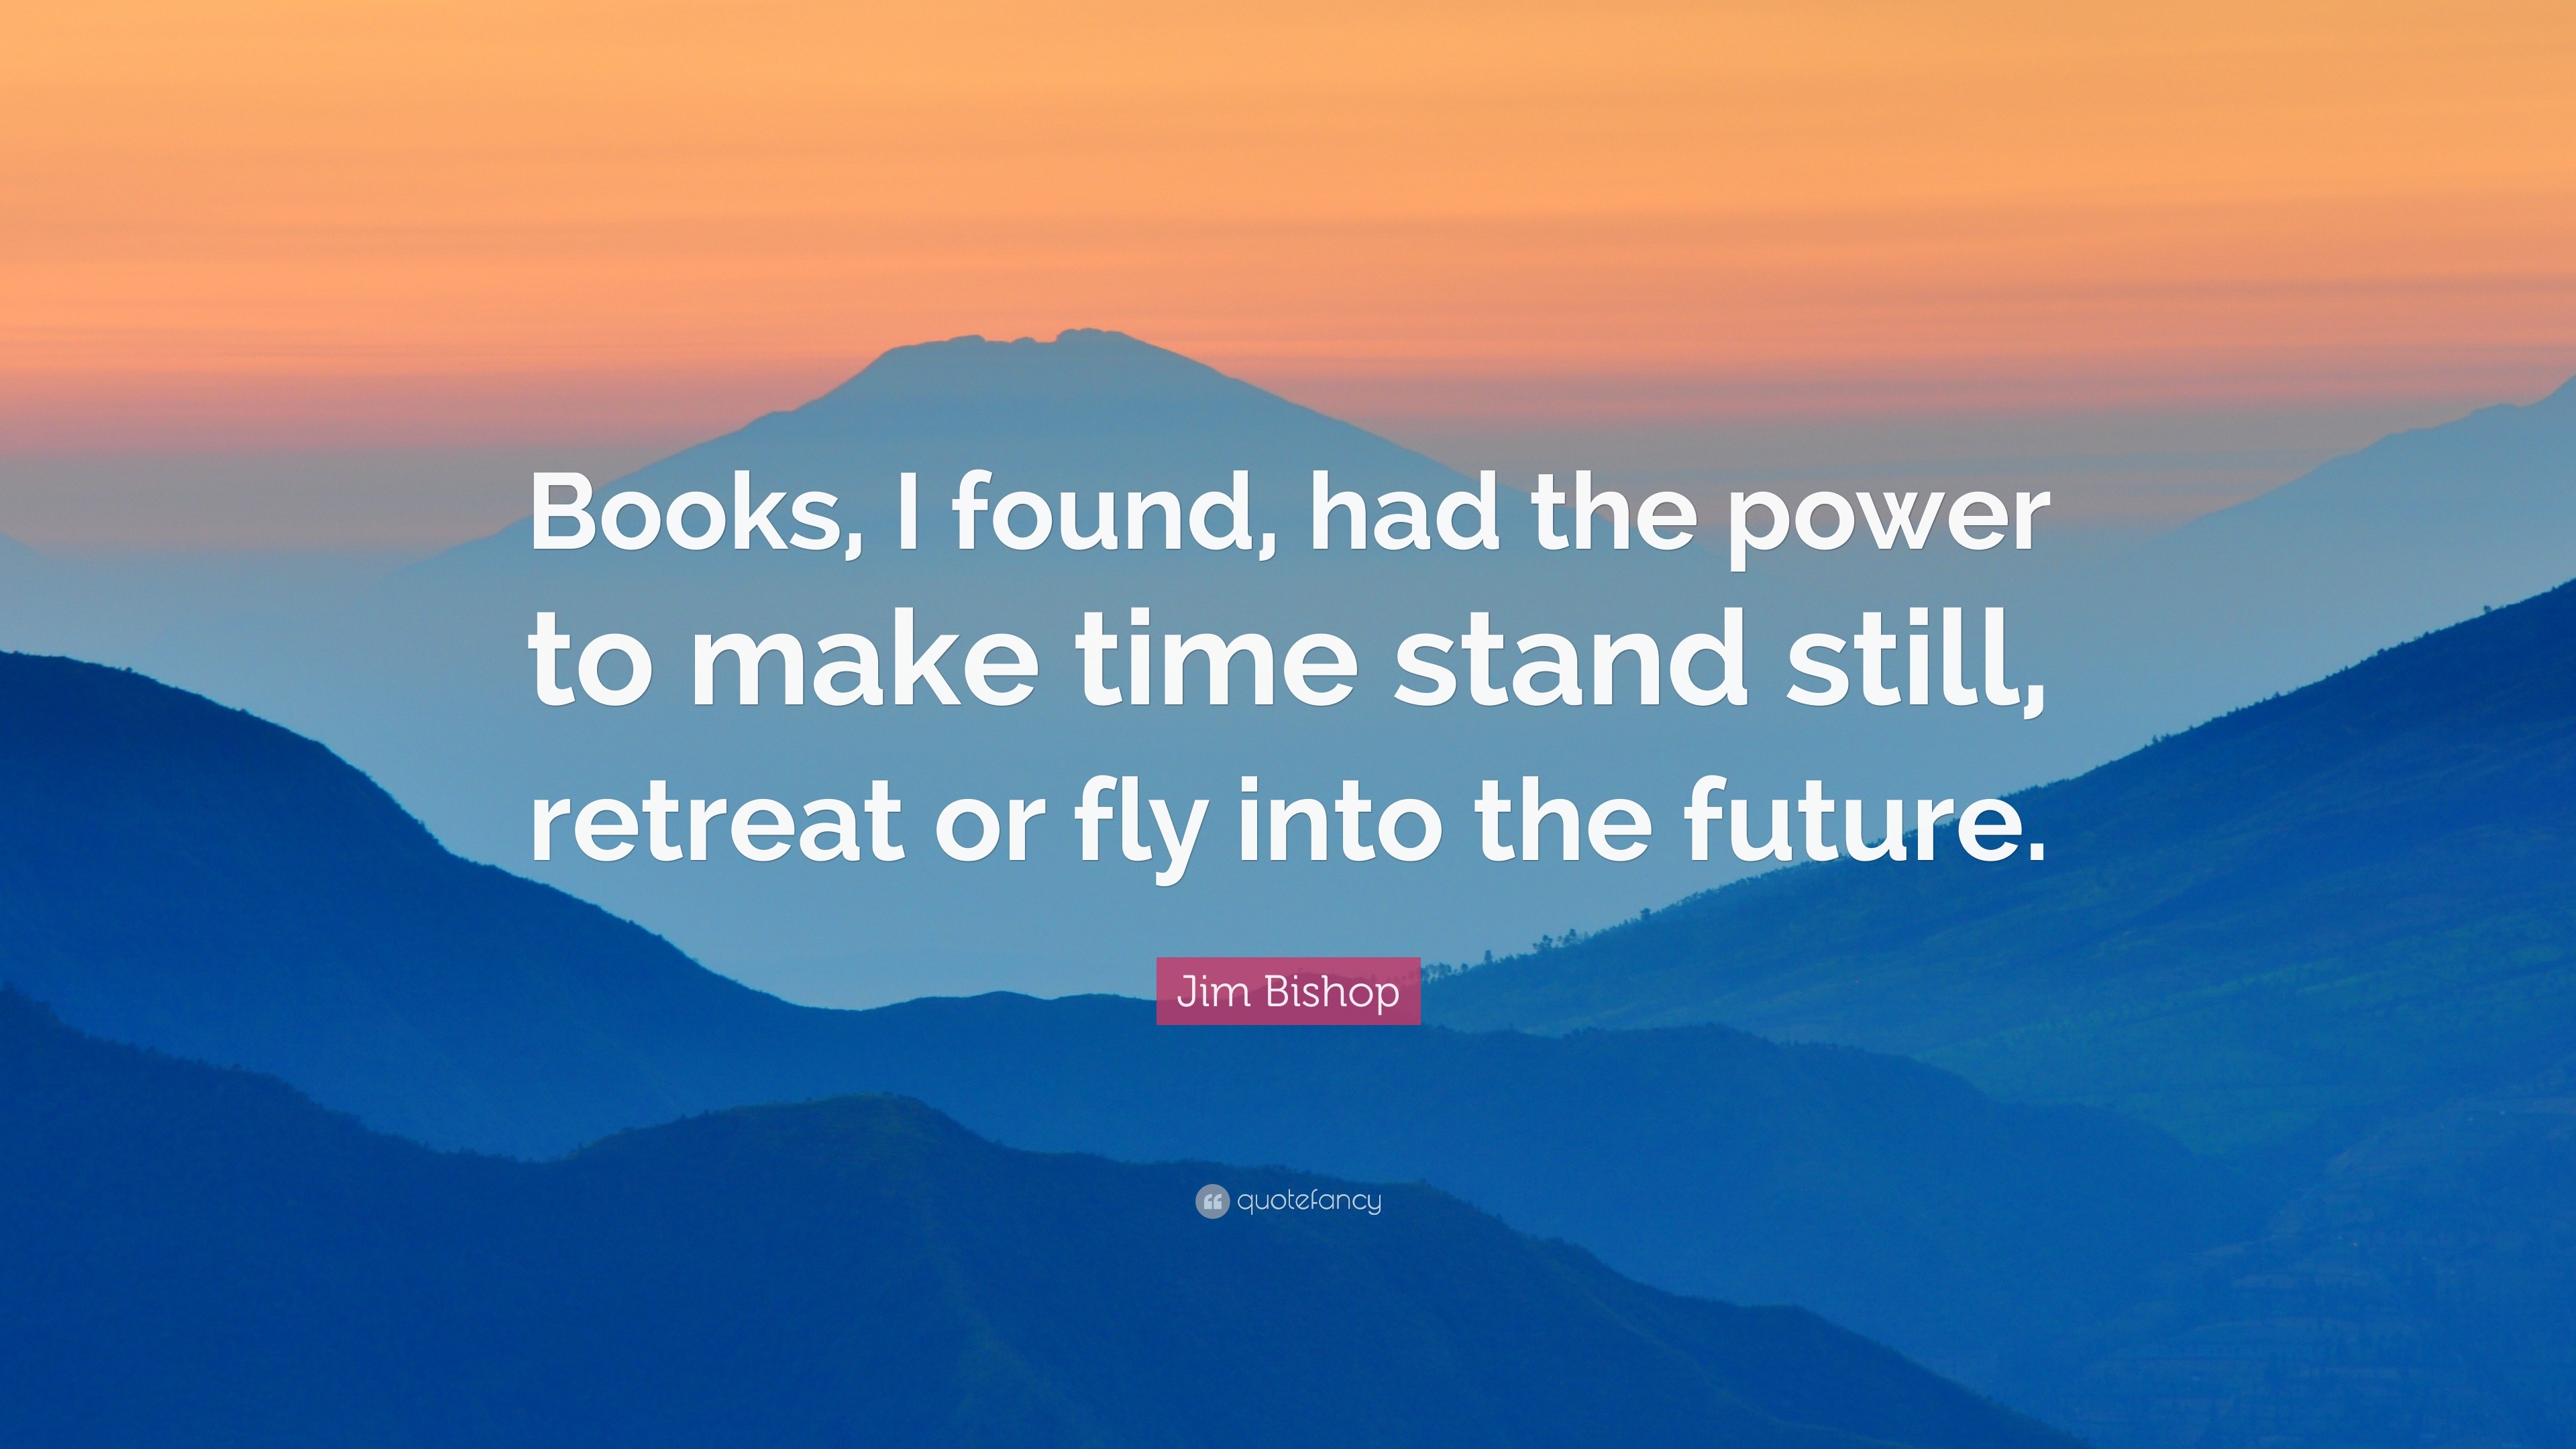 Jim Bishop Quote “Books I found had the power to make time